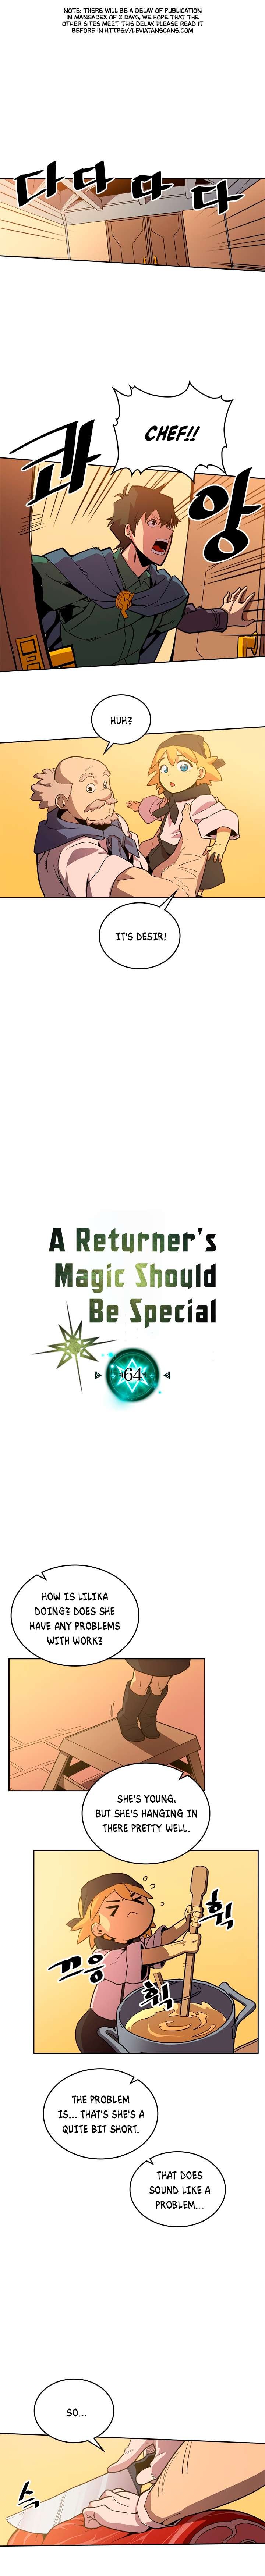 A Returner’s Magic Should be Special Chapter 64 - Page 1